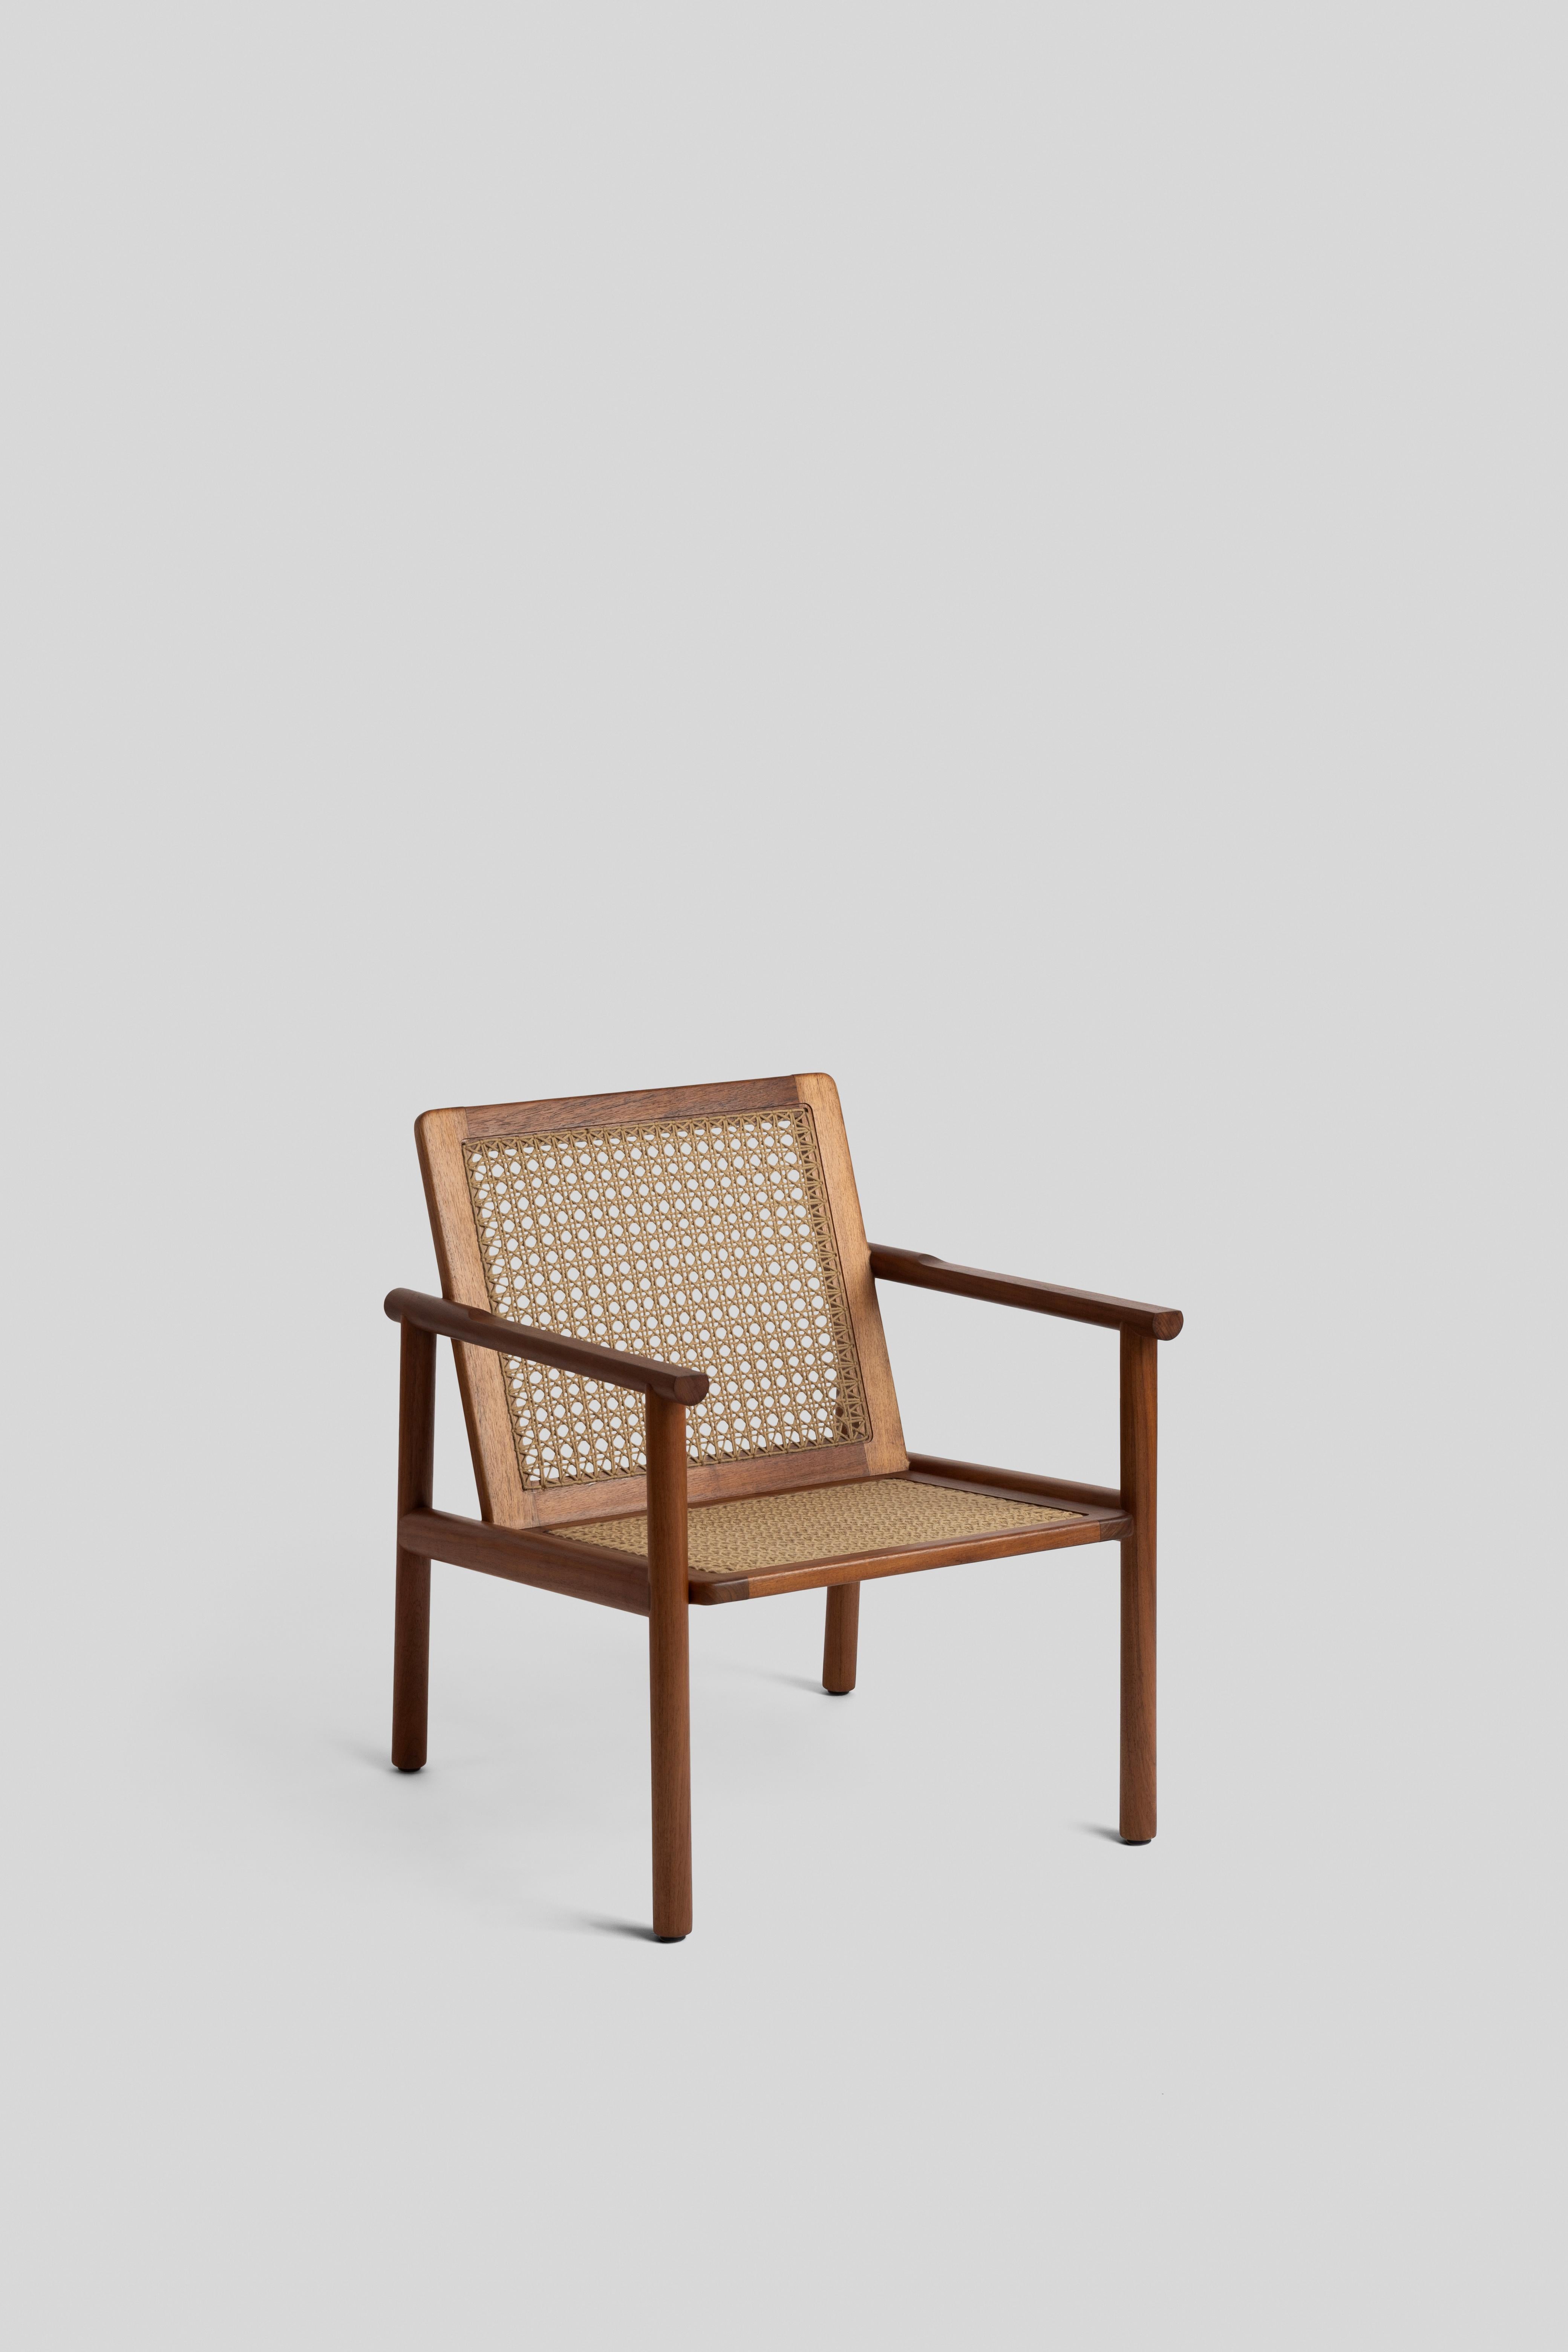 The design of the COCOM chair finds its roots in the rich tradition of wicker rockers and armchairs intricately woven in Yucatan. A testament to the fusion of tradition and modernity, this piece belongs to the esteemed COCOM collection. Each item in